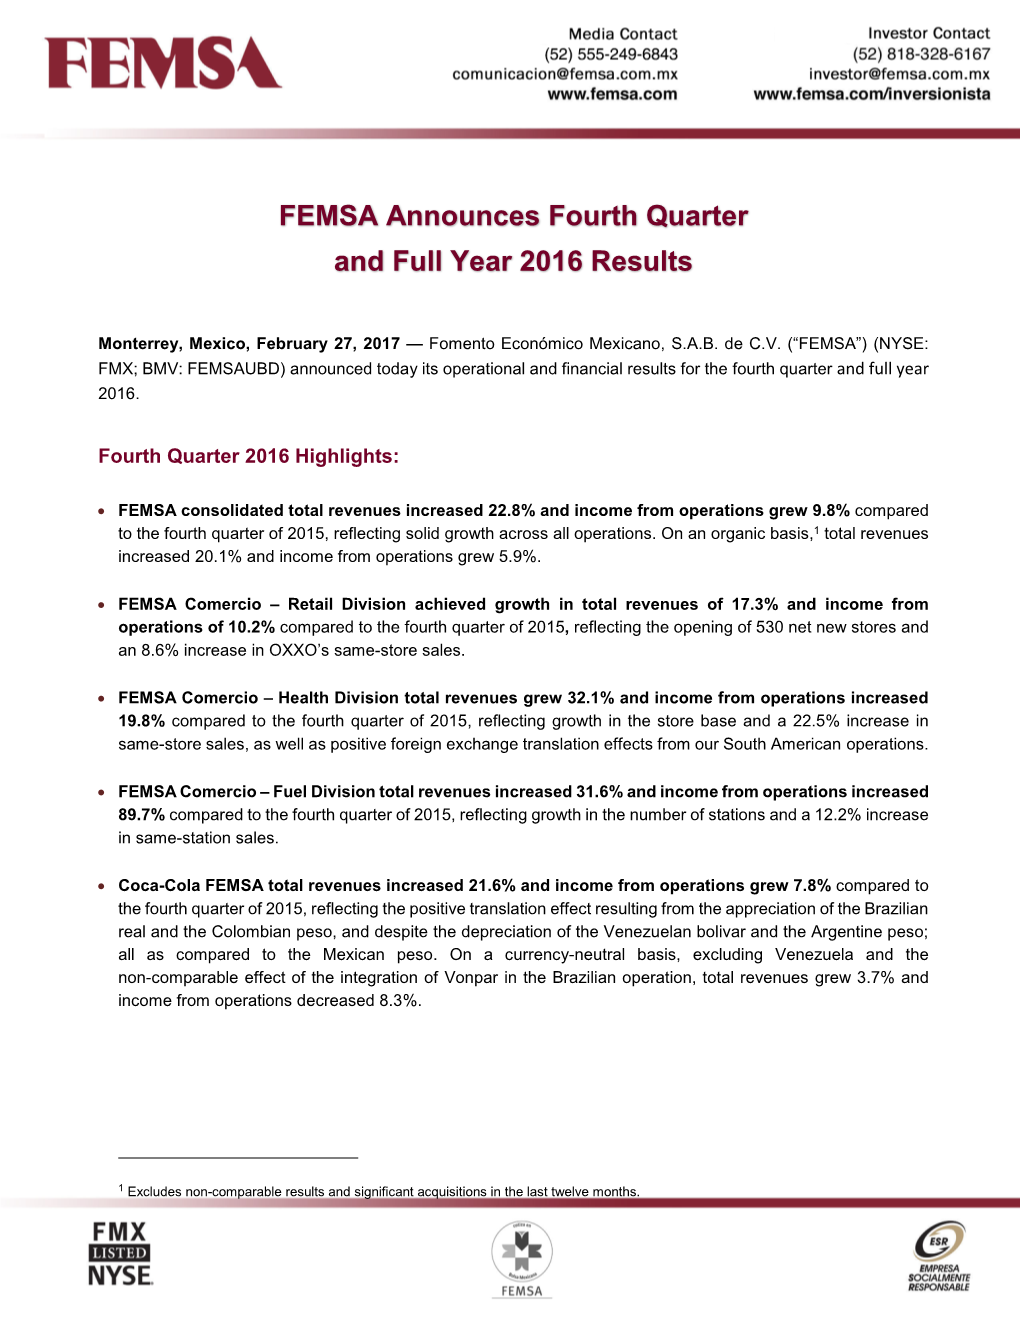 FEMSA Announces Fourth Quarter and Full Year 2016 Results